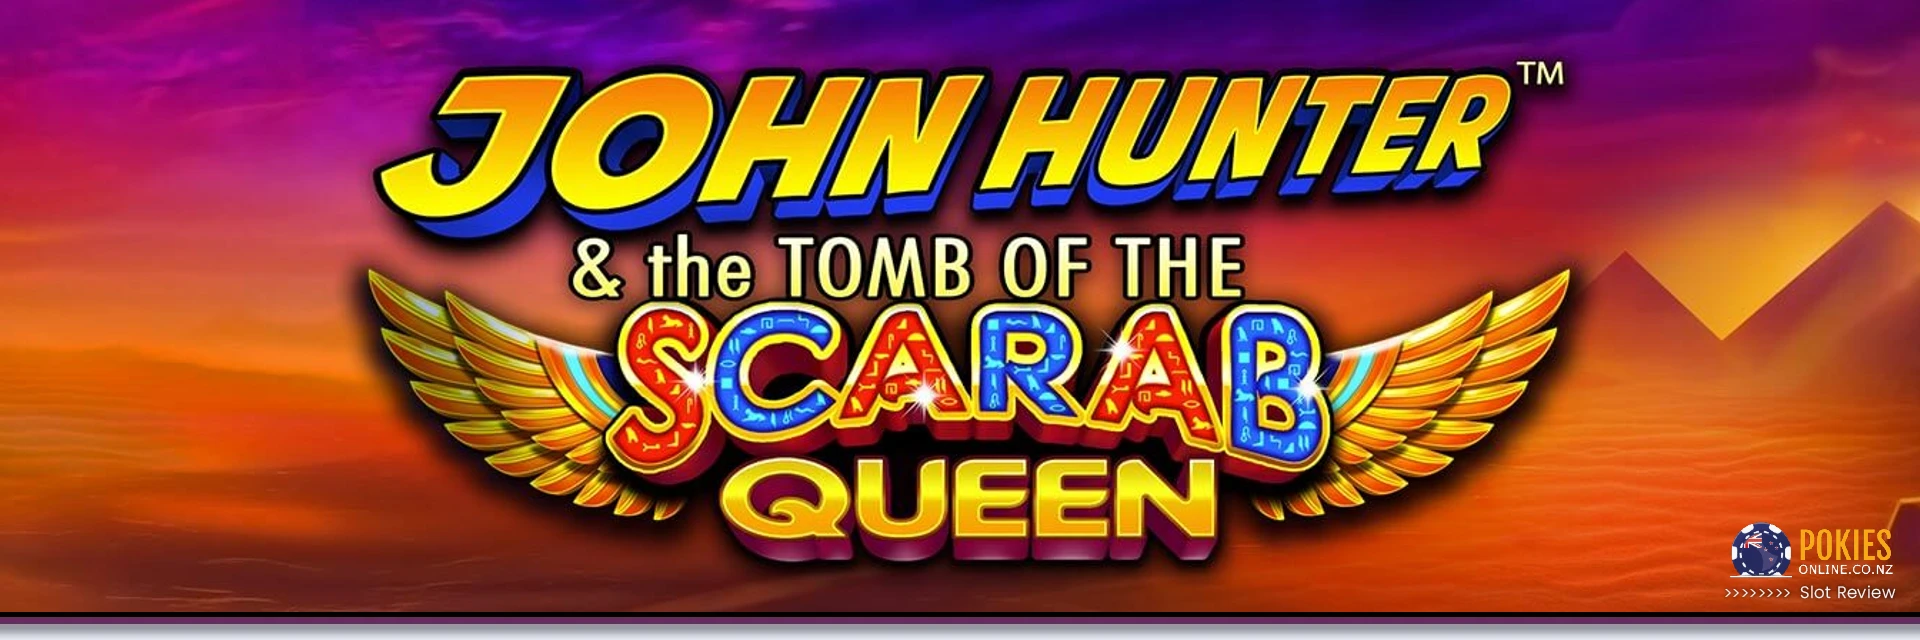 John Hunter and the Tomb of the Scarab Queen pokie